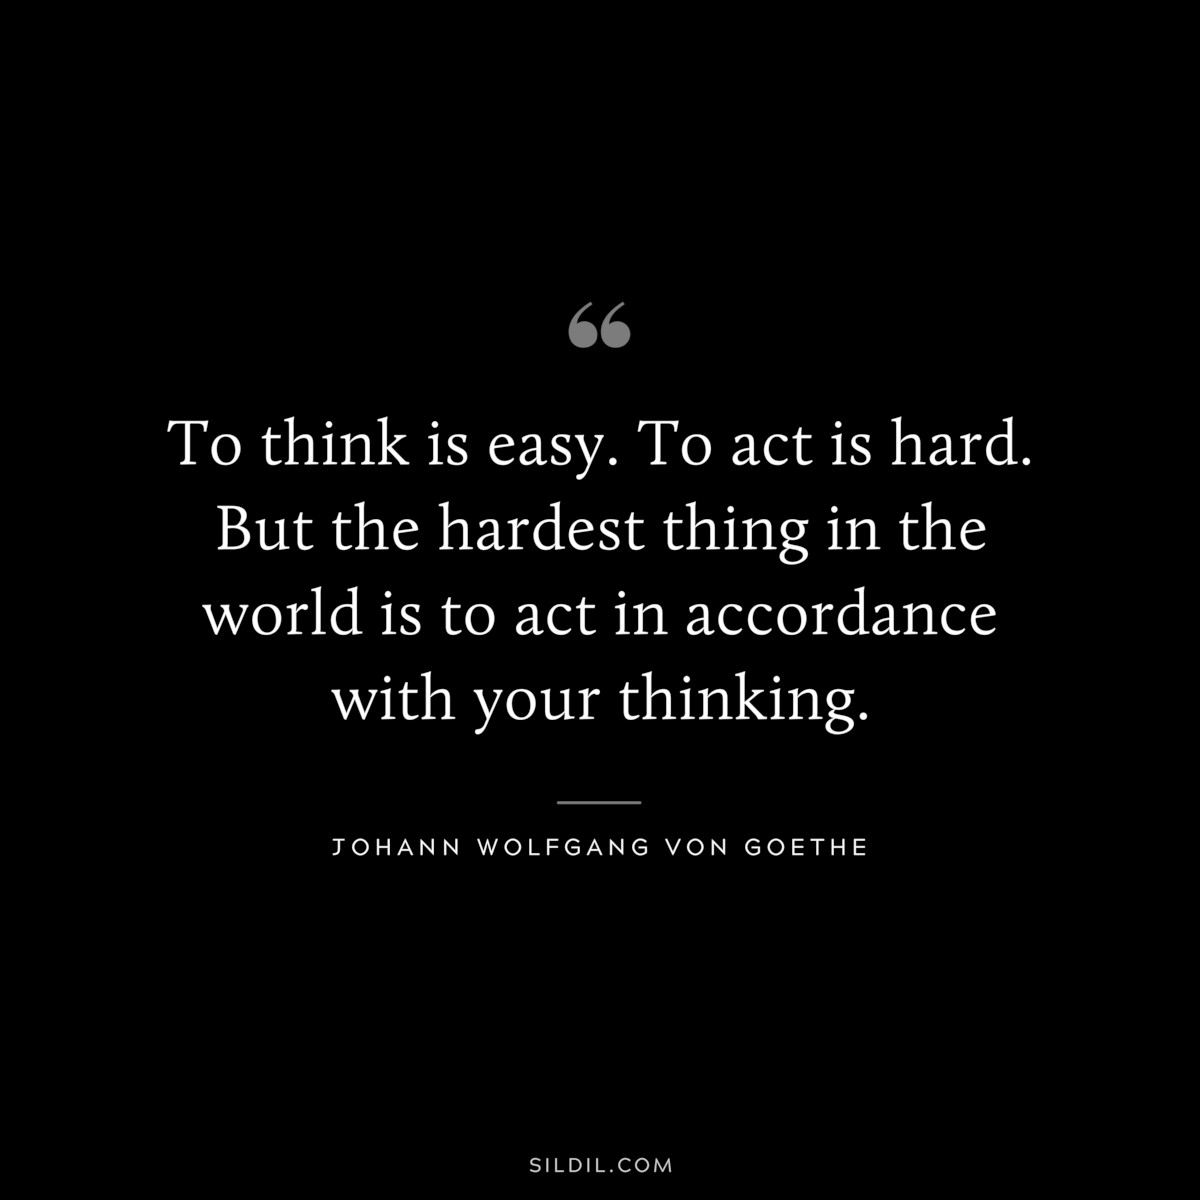 To think is easy. To act is hard. But the hardest thing in the world is to act in accordance with your thinking.― Johann Wolfgang von Goethe